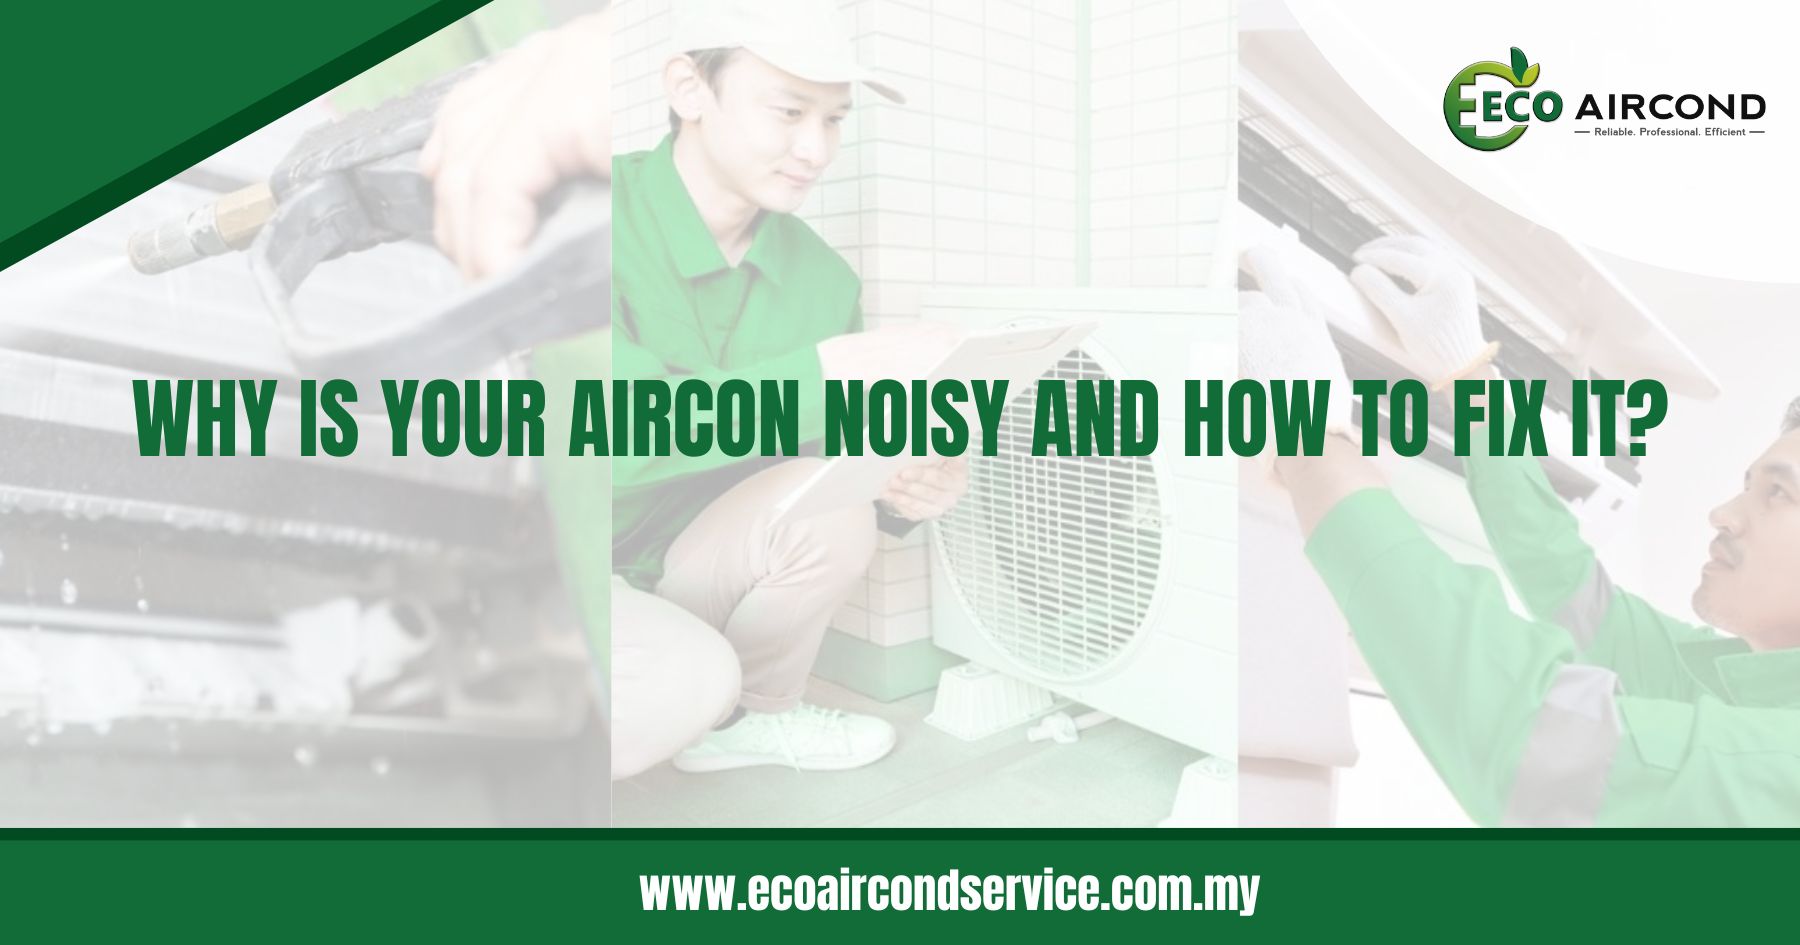 Why is Your Aircon Noisy and How to Fix It?